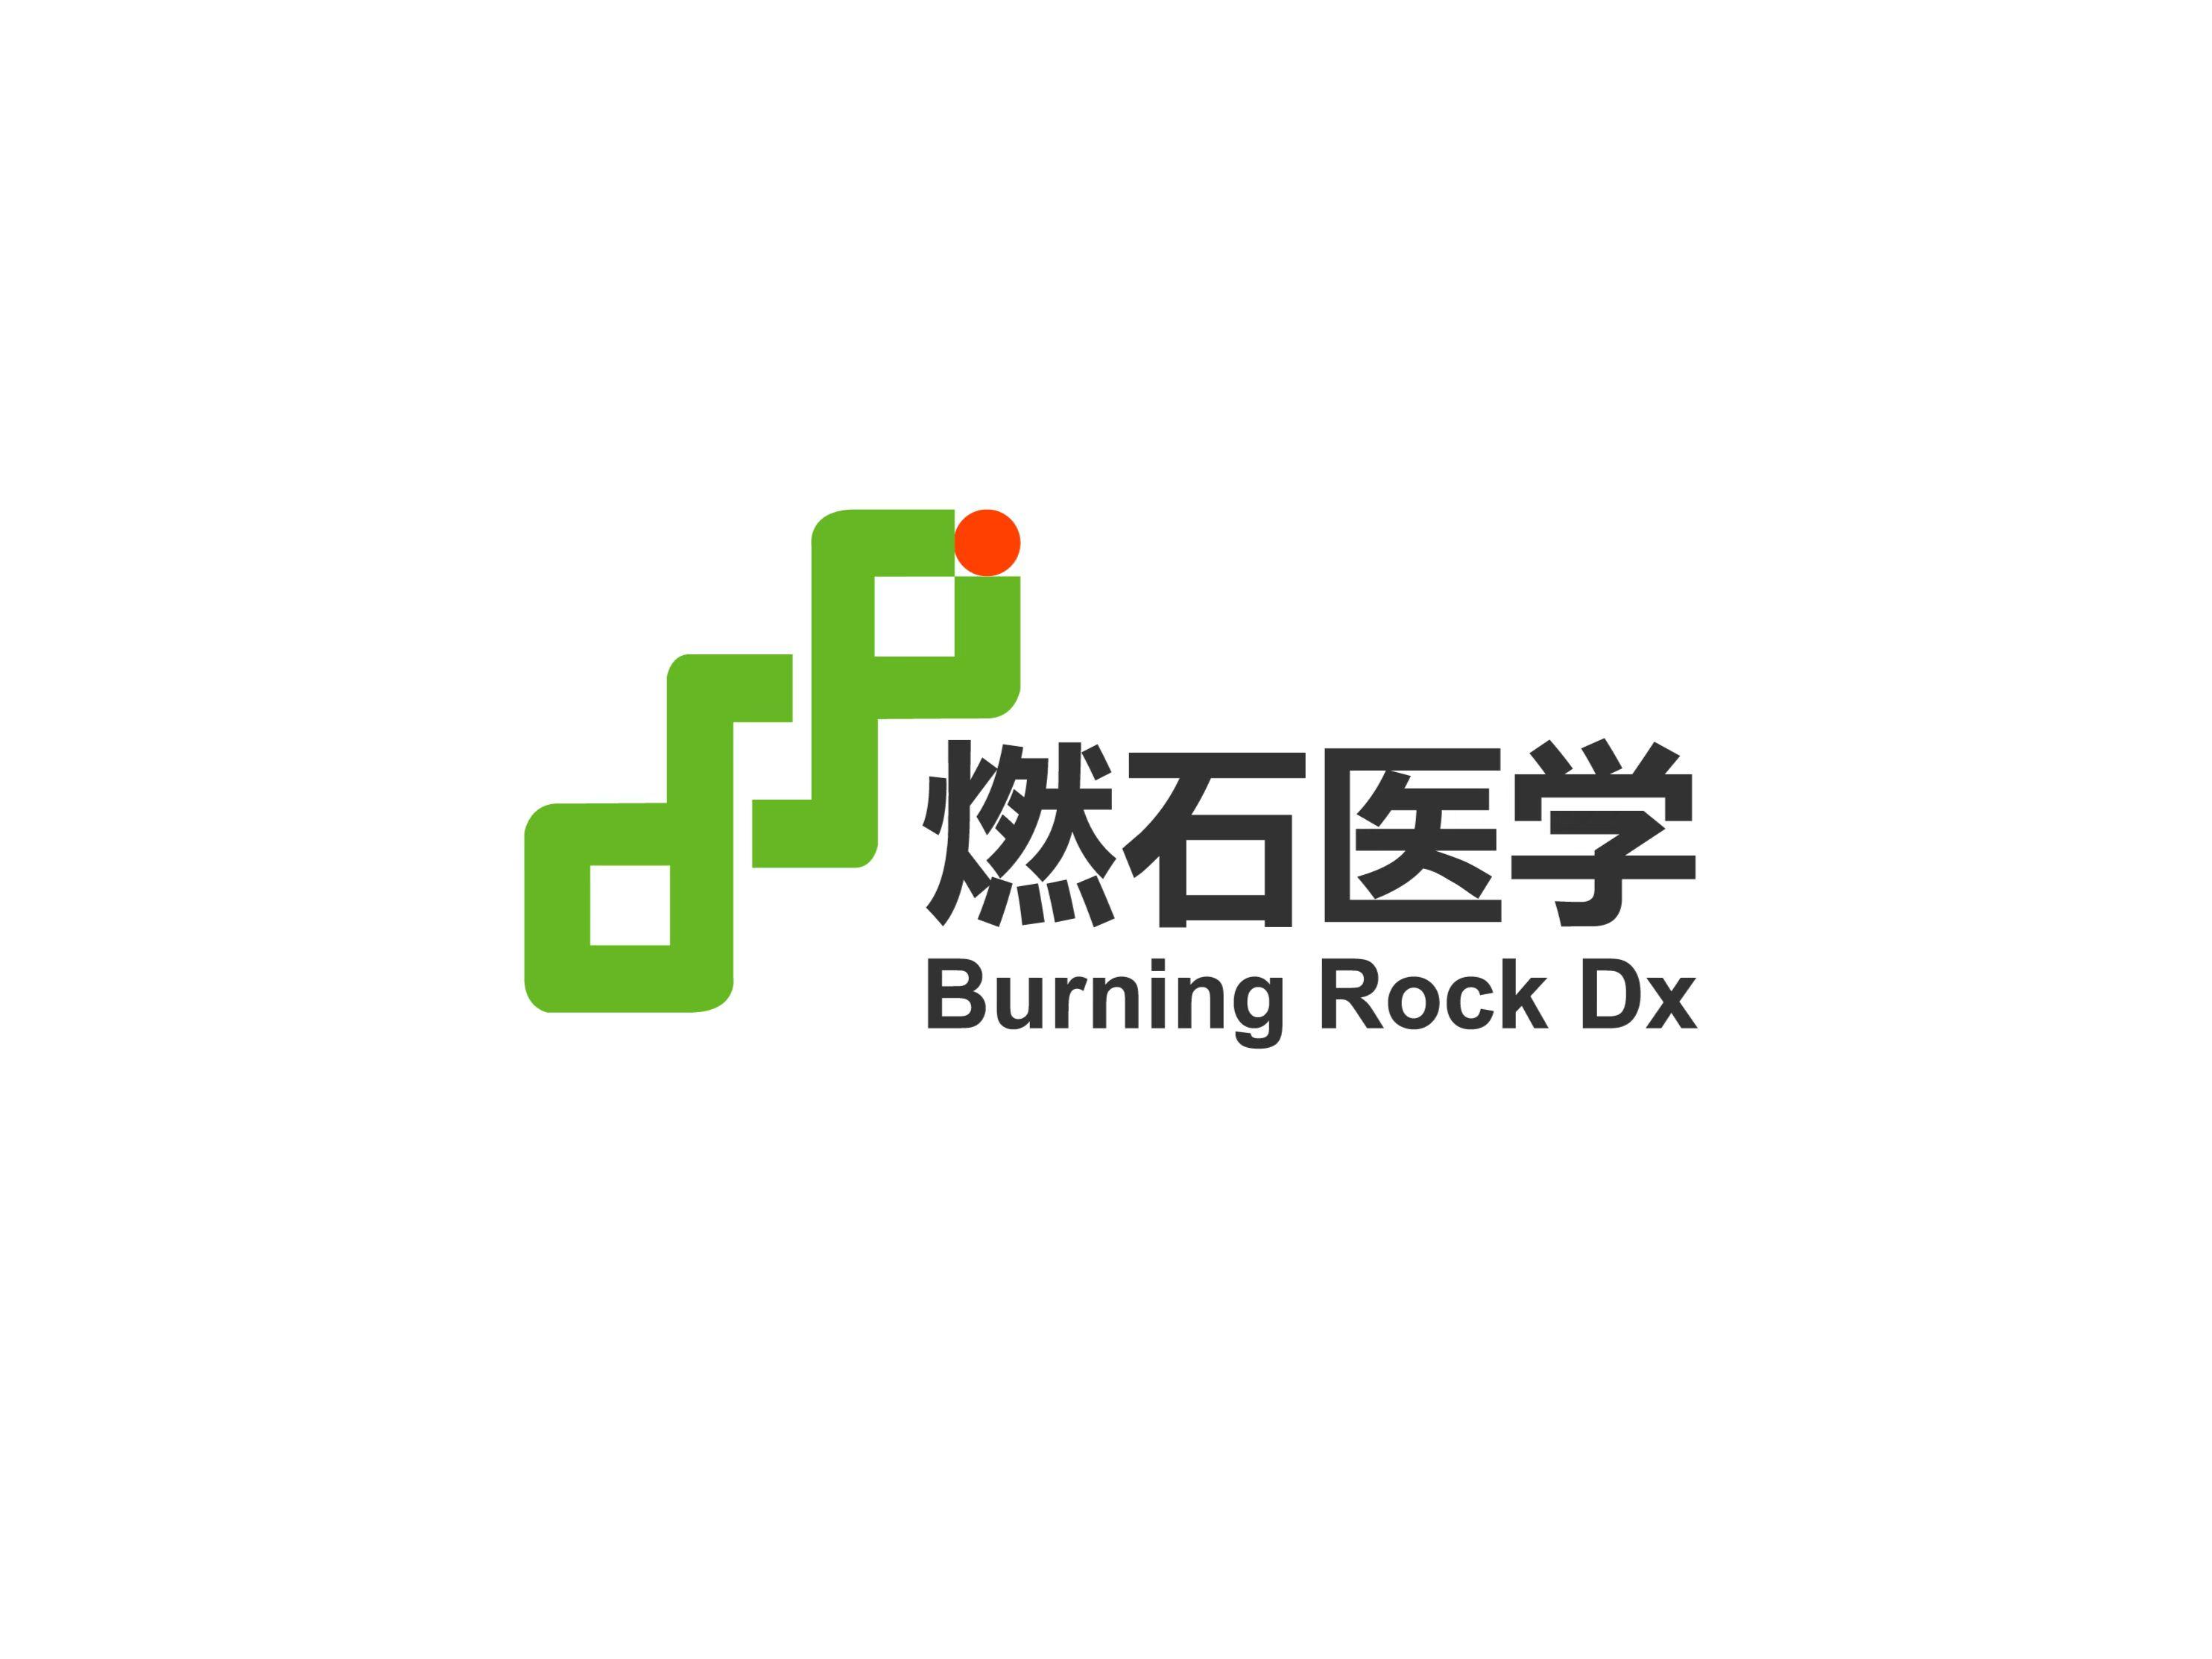  Burning Rock Received Breakthrough Device Designation from China’s NMPA for its Multi-Cancer Early Detection Test